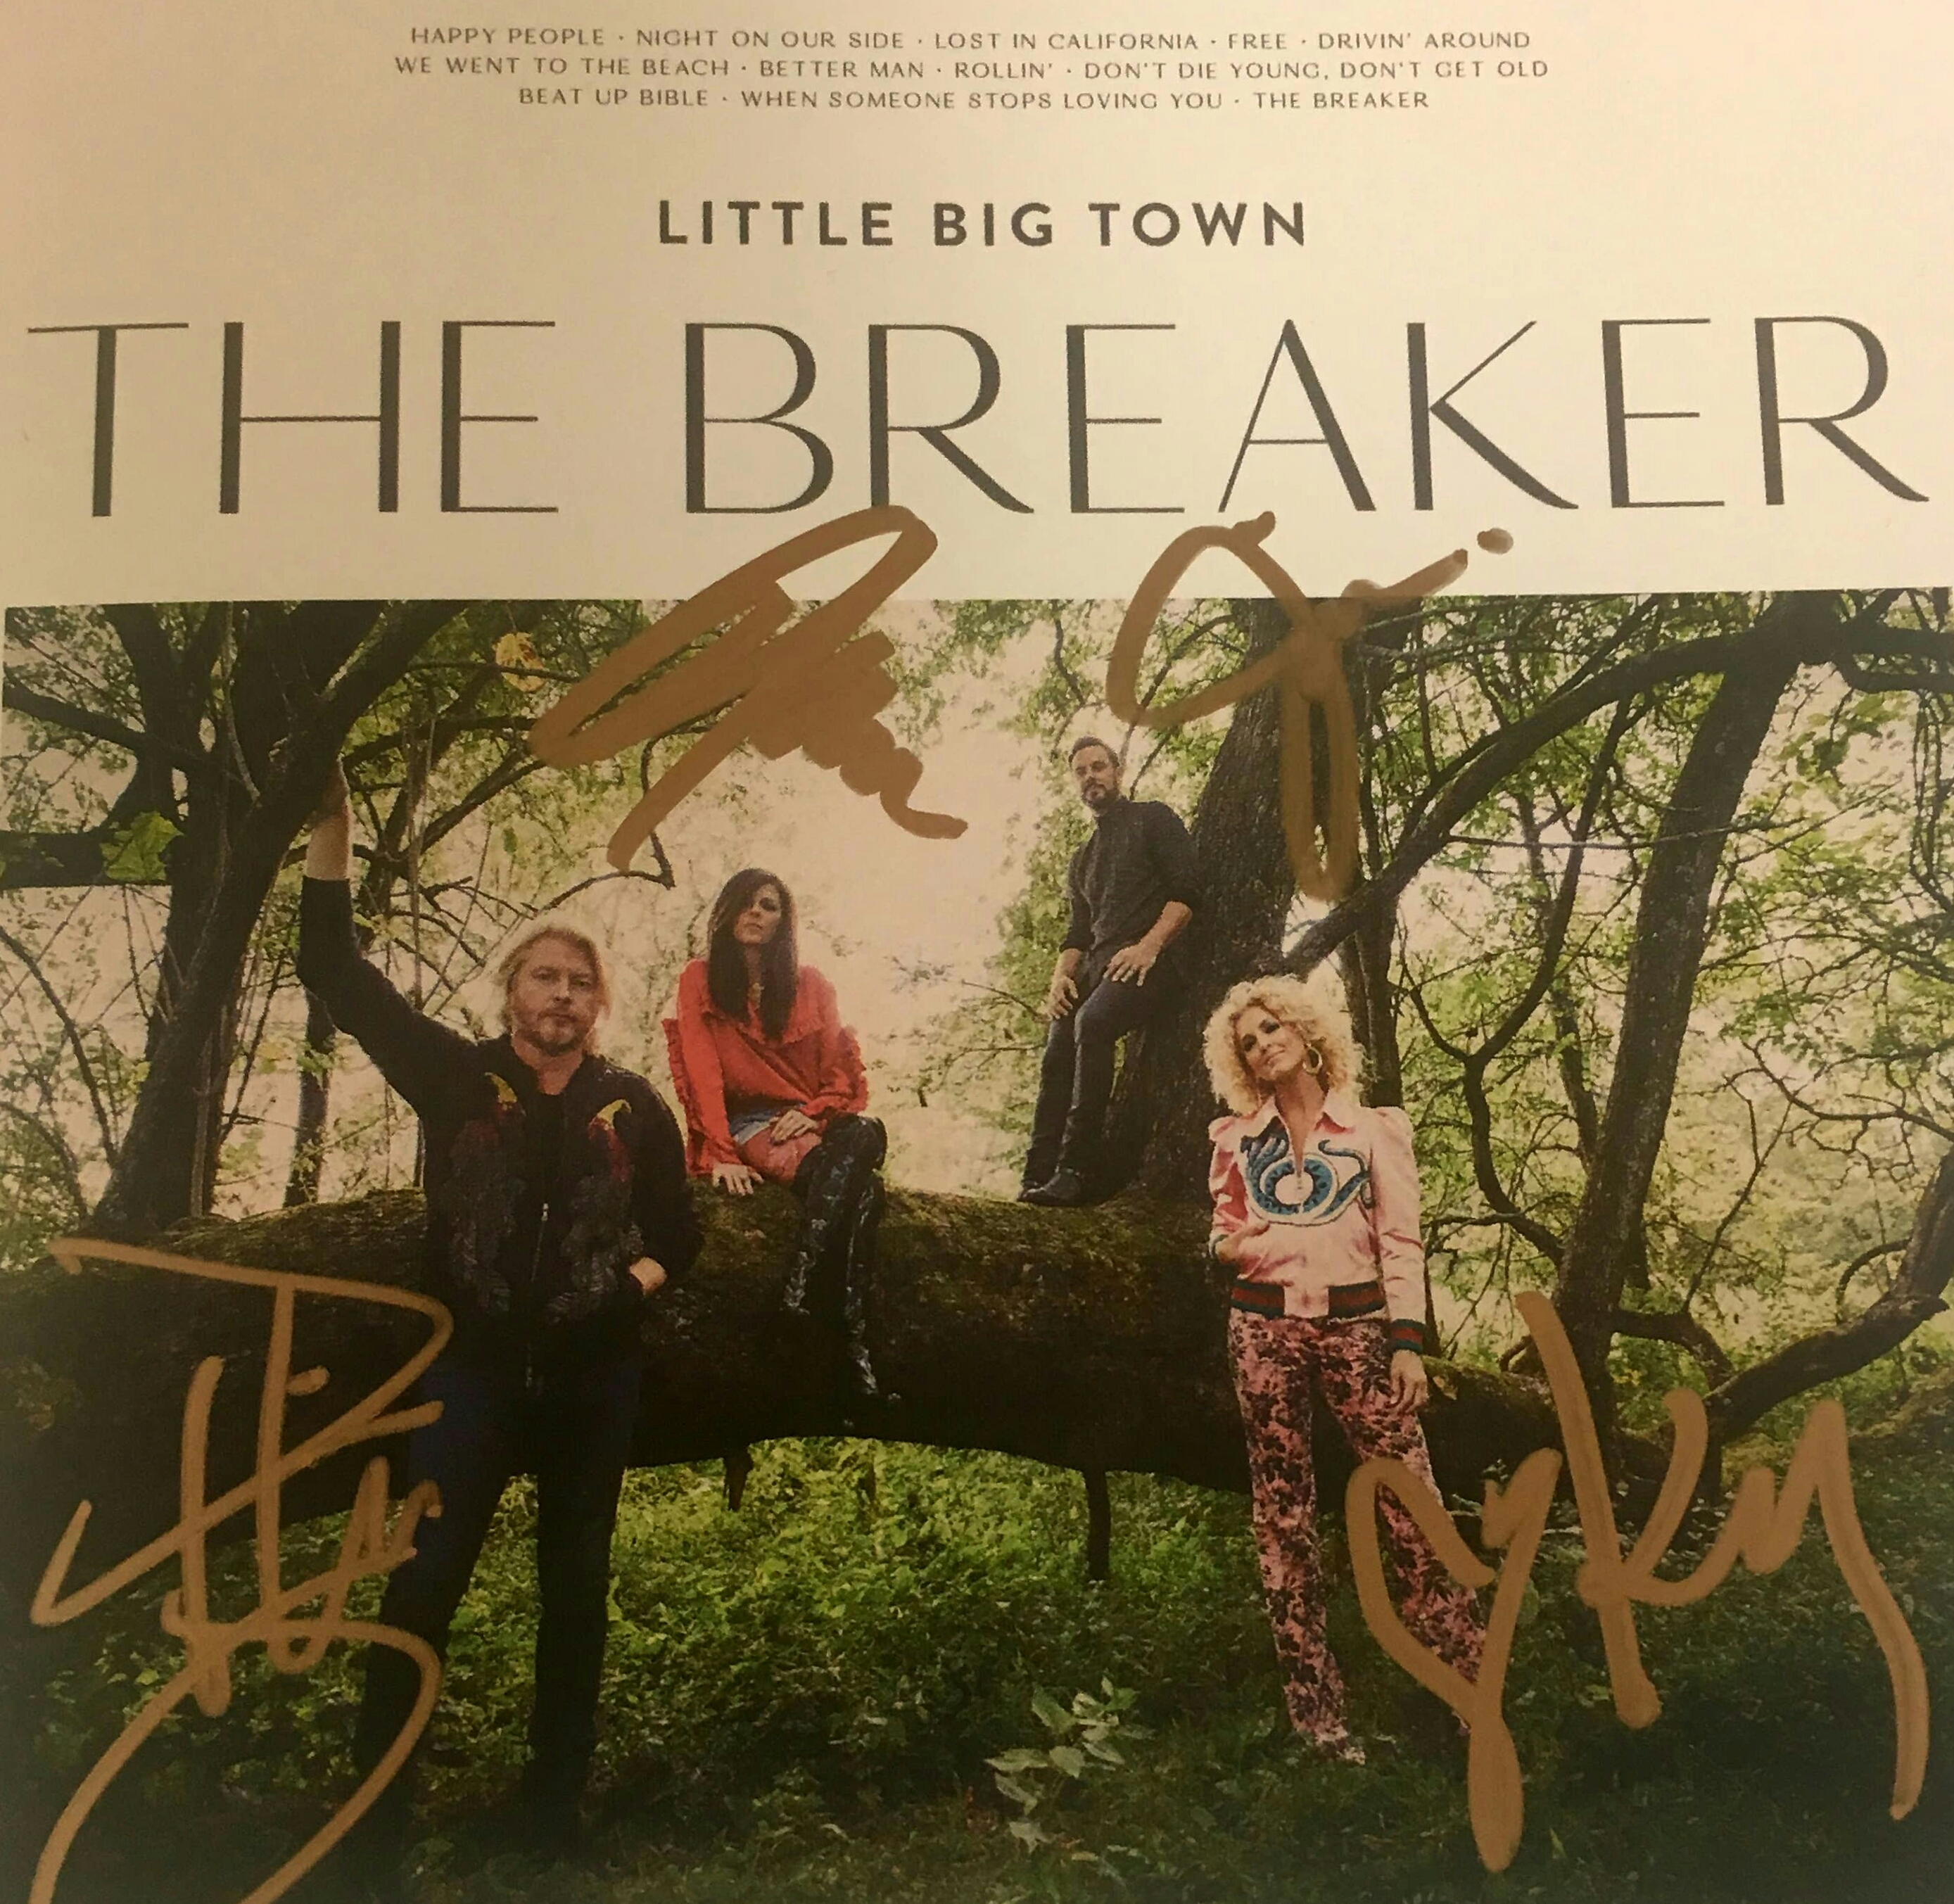 WIN an Autographed Copy of Little Big Town's 'The Breaker' Sounds Like Nashville